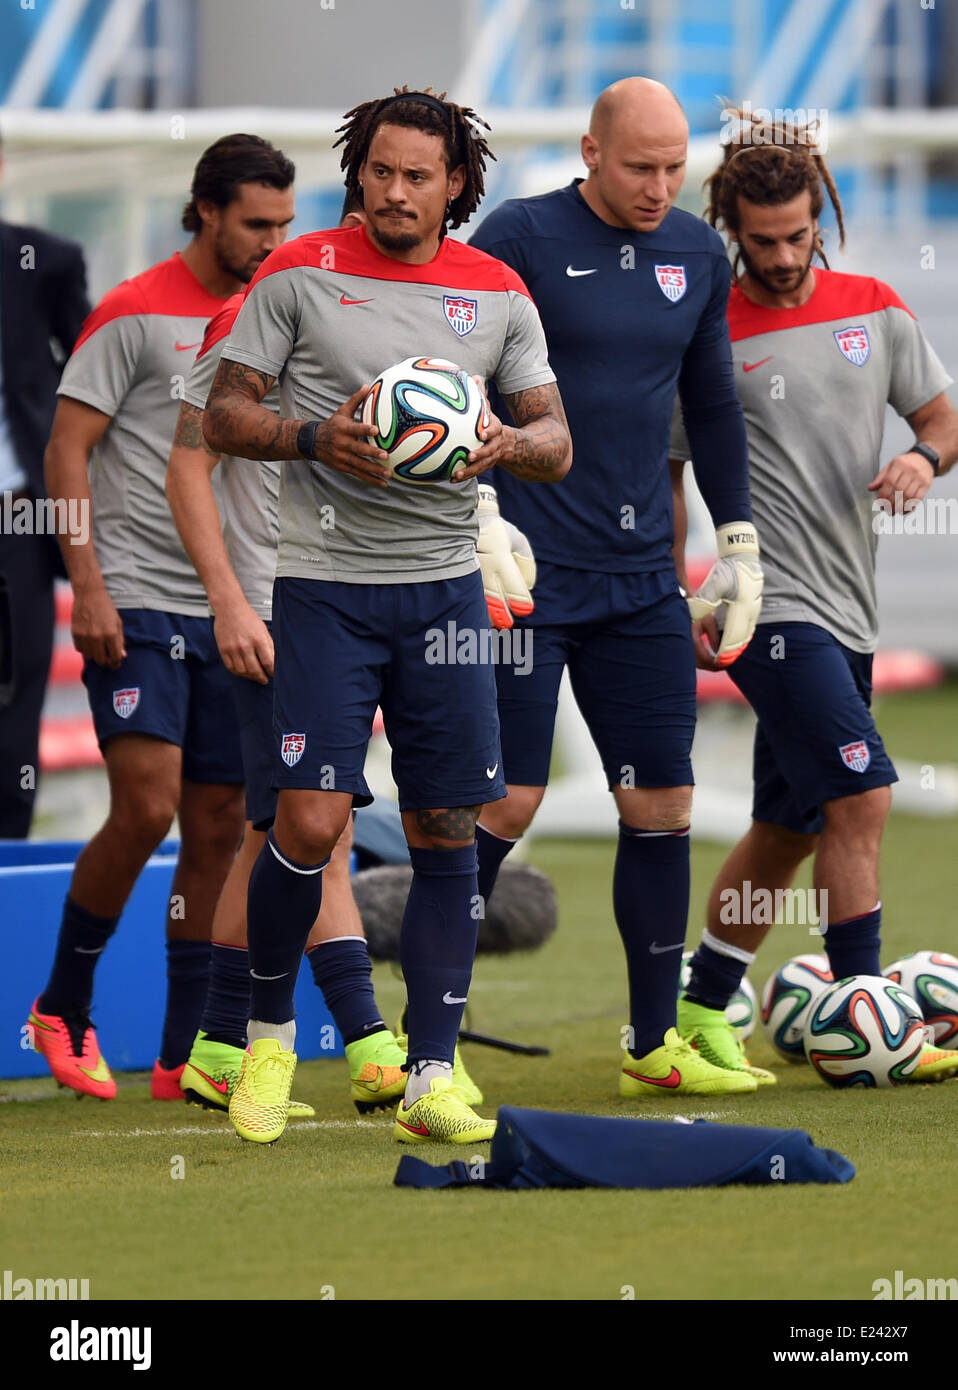 Natal, Brazil. 15th June, 2014. Jermaine Jones (2-L) and goalkeeper Brad Guzan (2-R) seen during a training session of USA's national soccer team at the Arena das Dunas Stadium in Natal, Brazil, 15 June 2014. Ghana will face USA in their group G preliminary round match at the FIFA World Cup 2014 on 16 June 2014 in Natal. Photo: Marius Becker/dpa/Alamy Live News Stock Photo